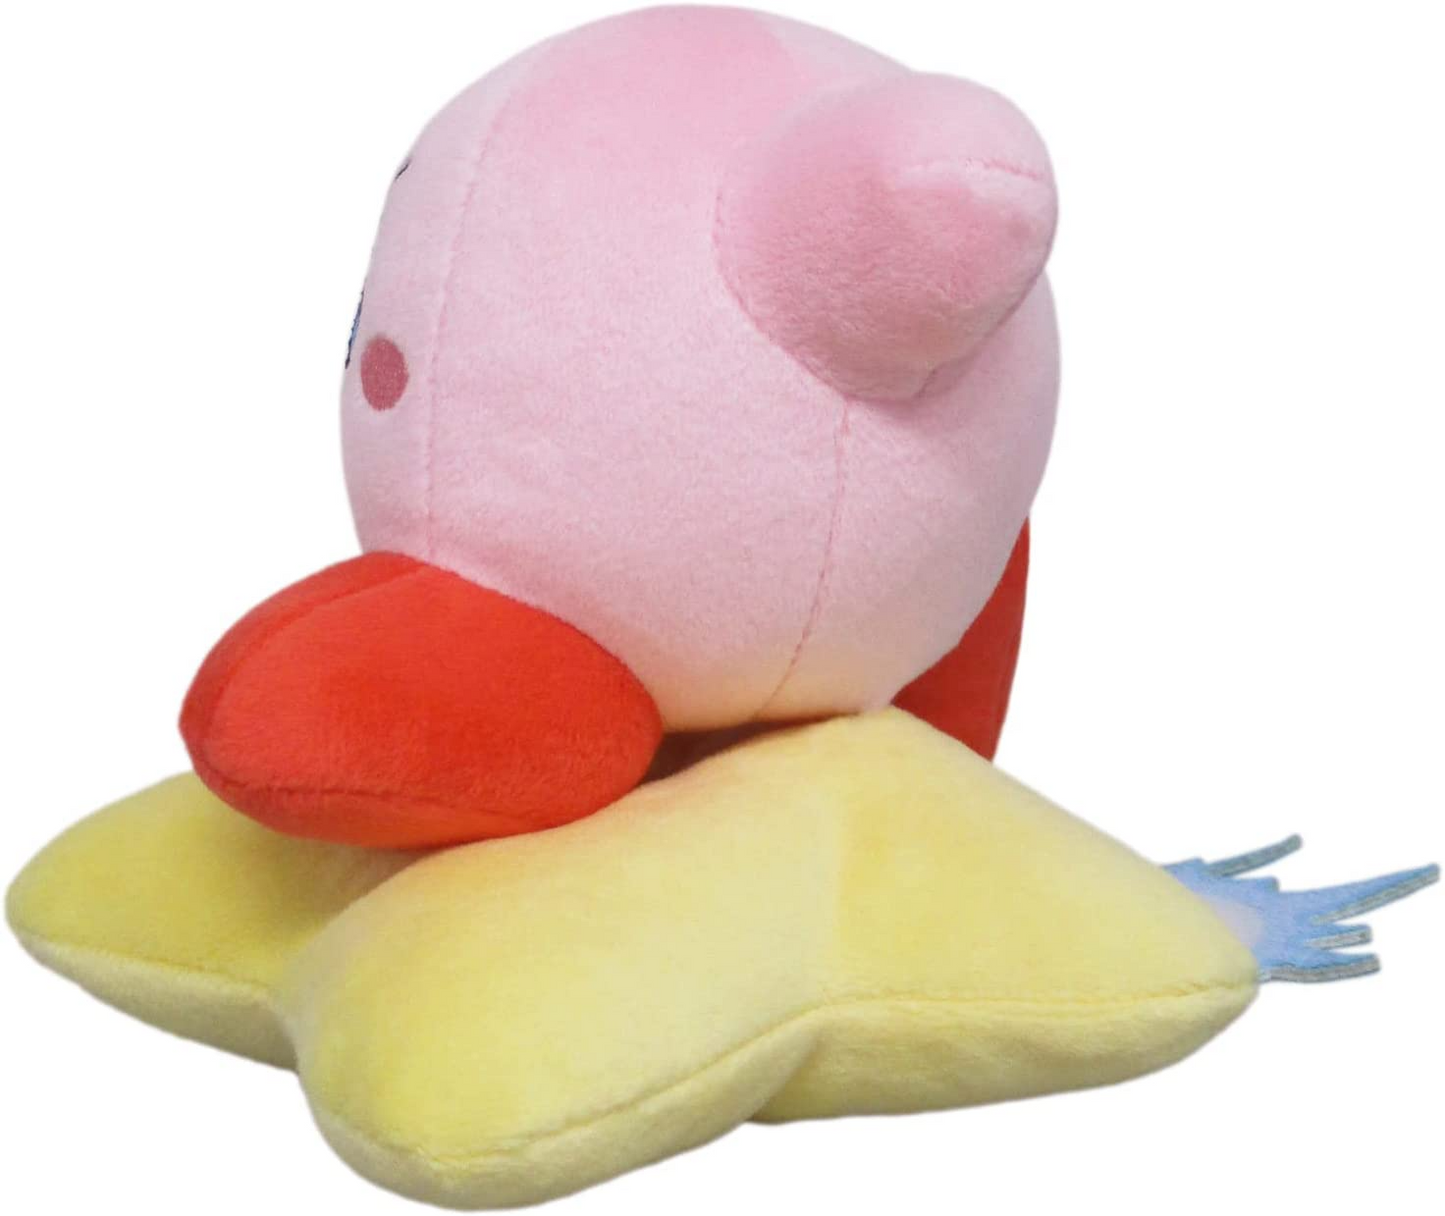 KIRBY'S AIR RIDE - KIRBY Launch 30th Anniversary Sanei Plush Toy (3.7 in) NEW!